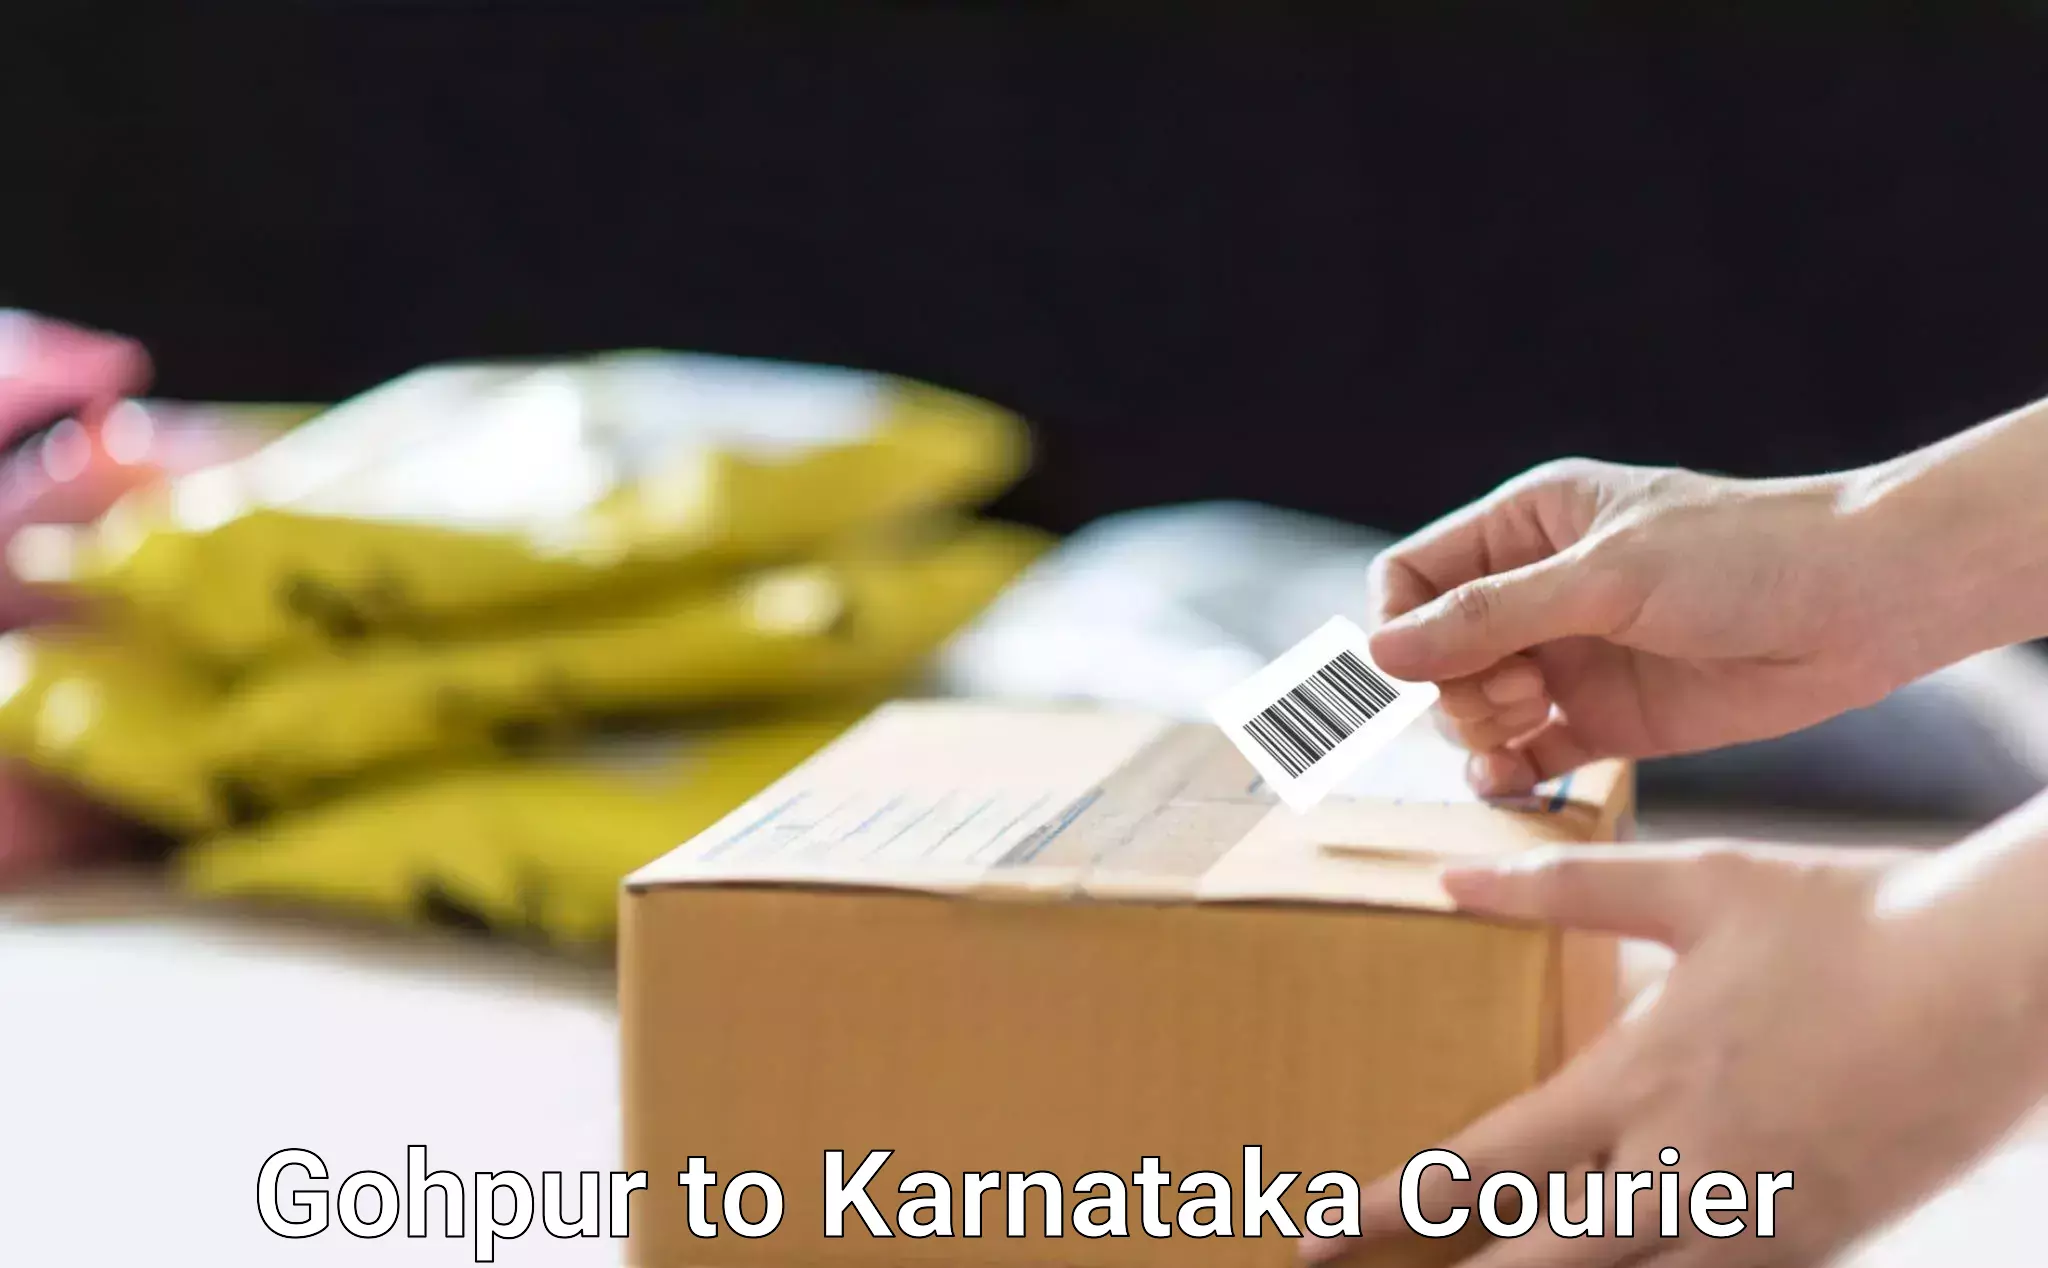 Automated parcel services Gohpur to Shiralakoppa